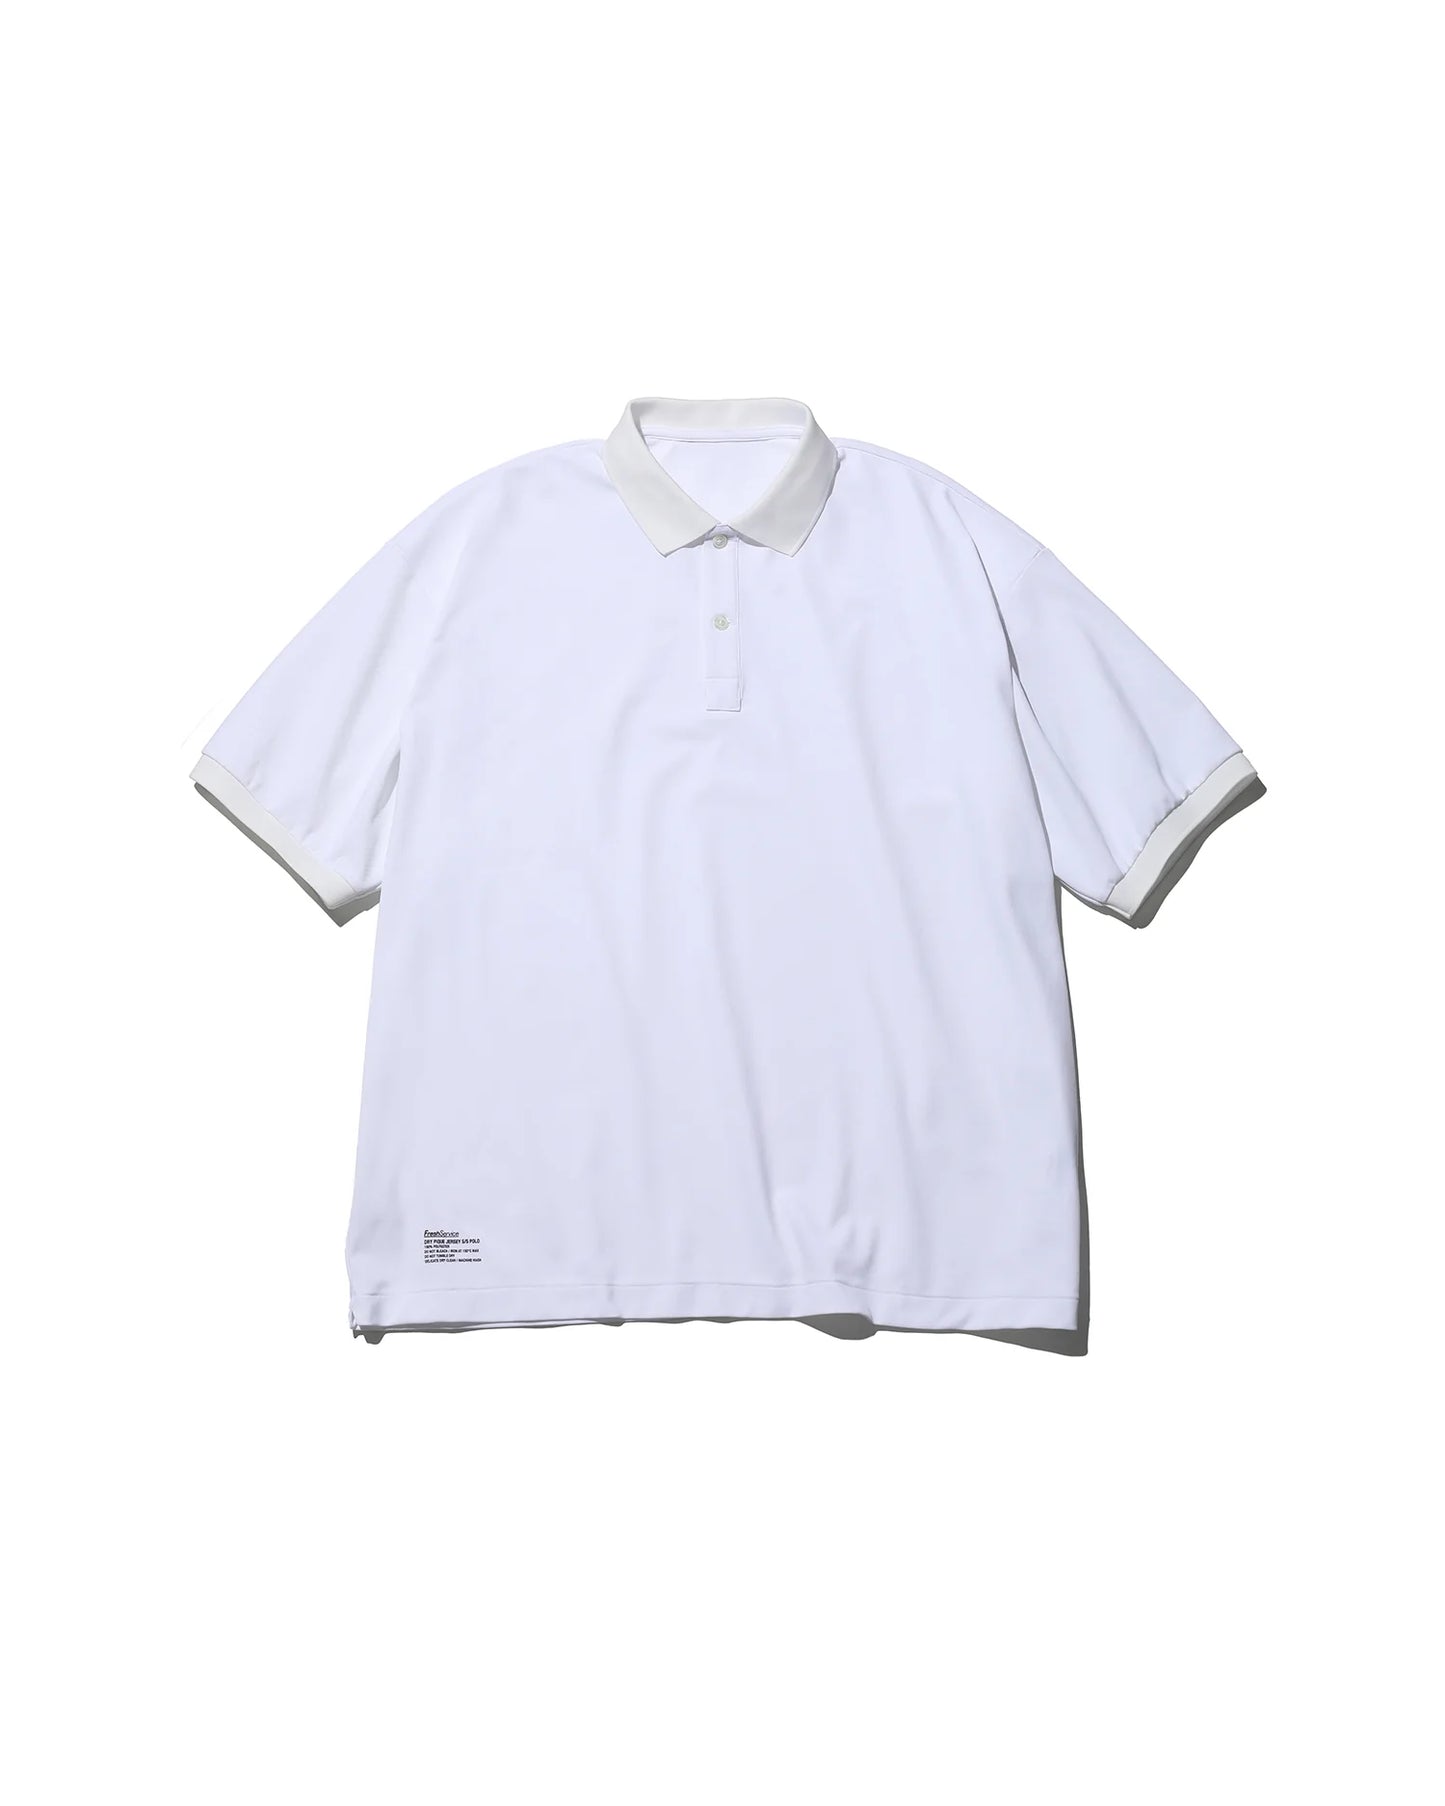 FreshService DRY PIQUE JERSEY S/S POLO